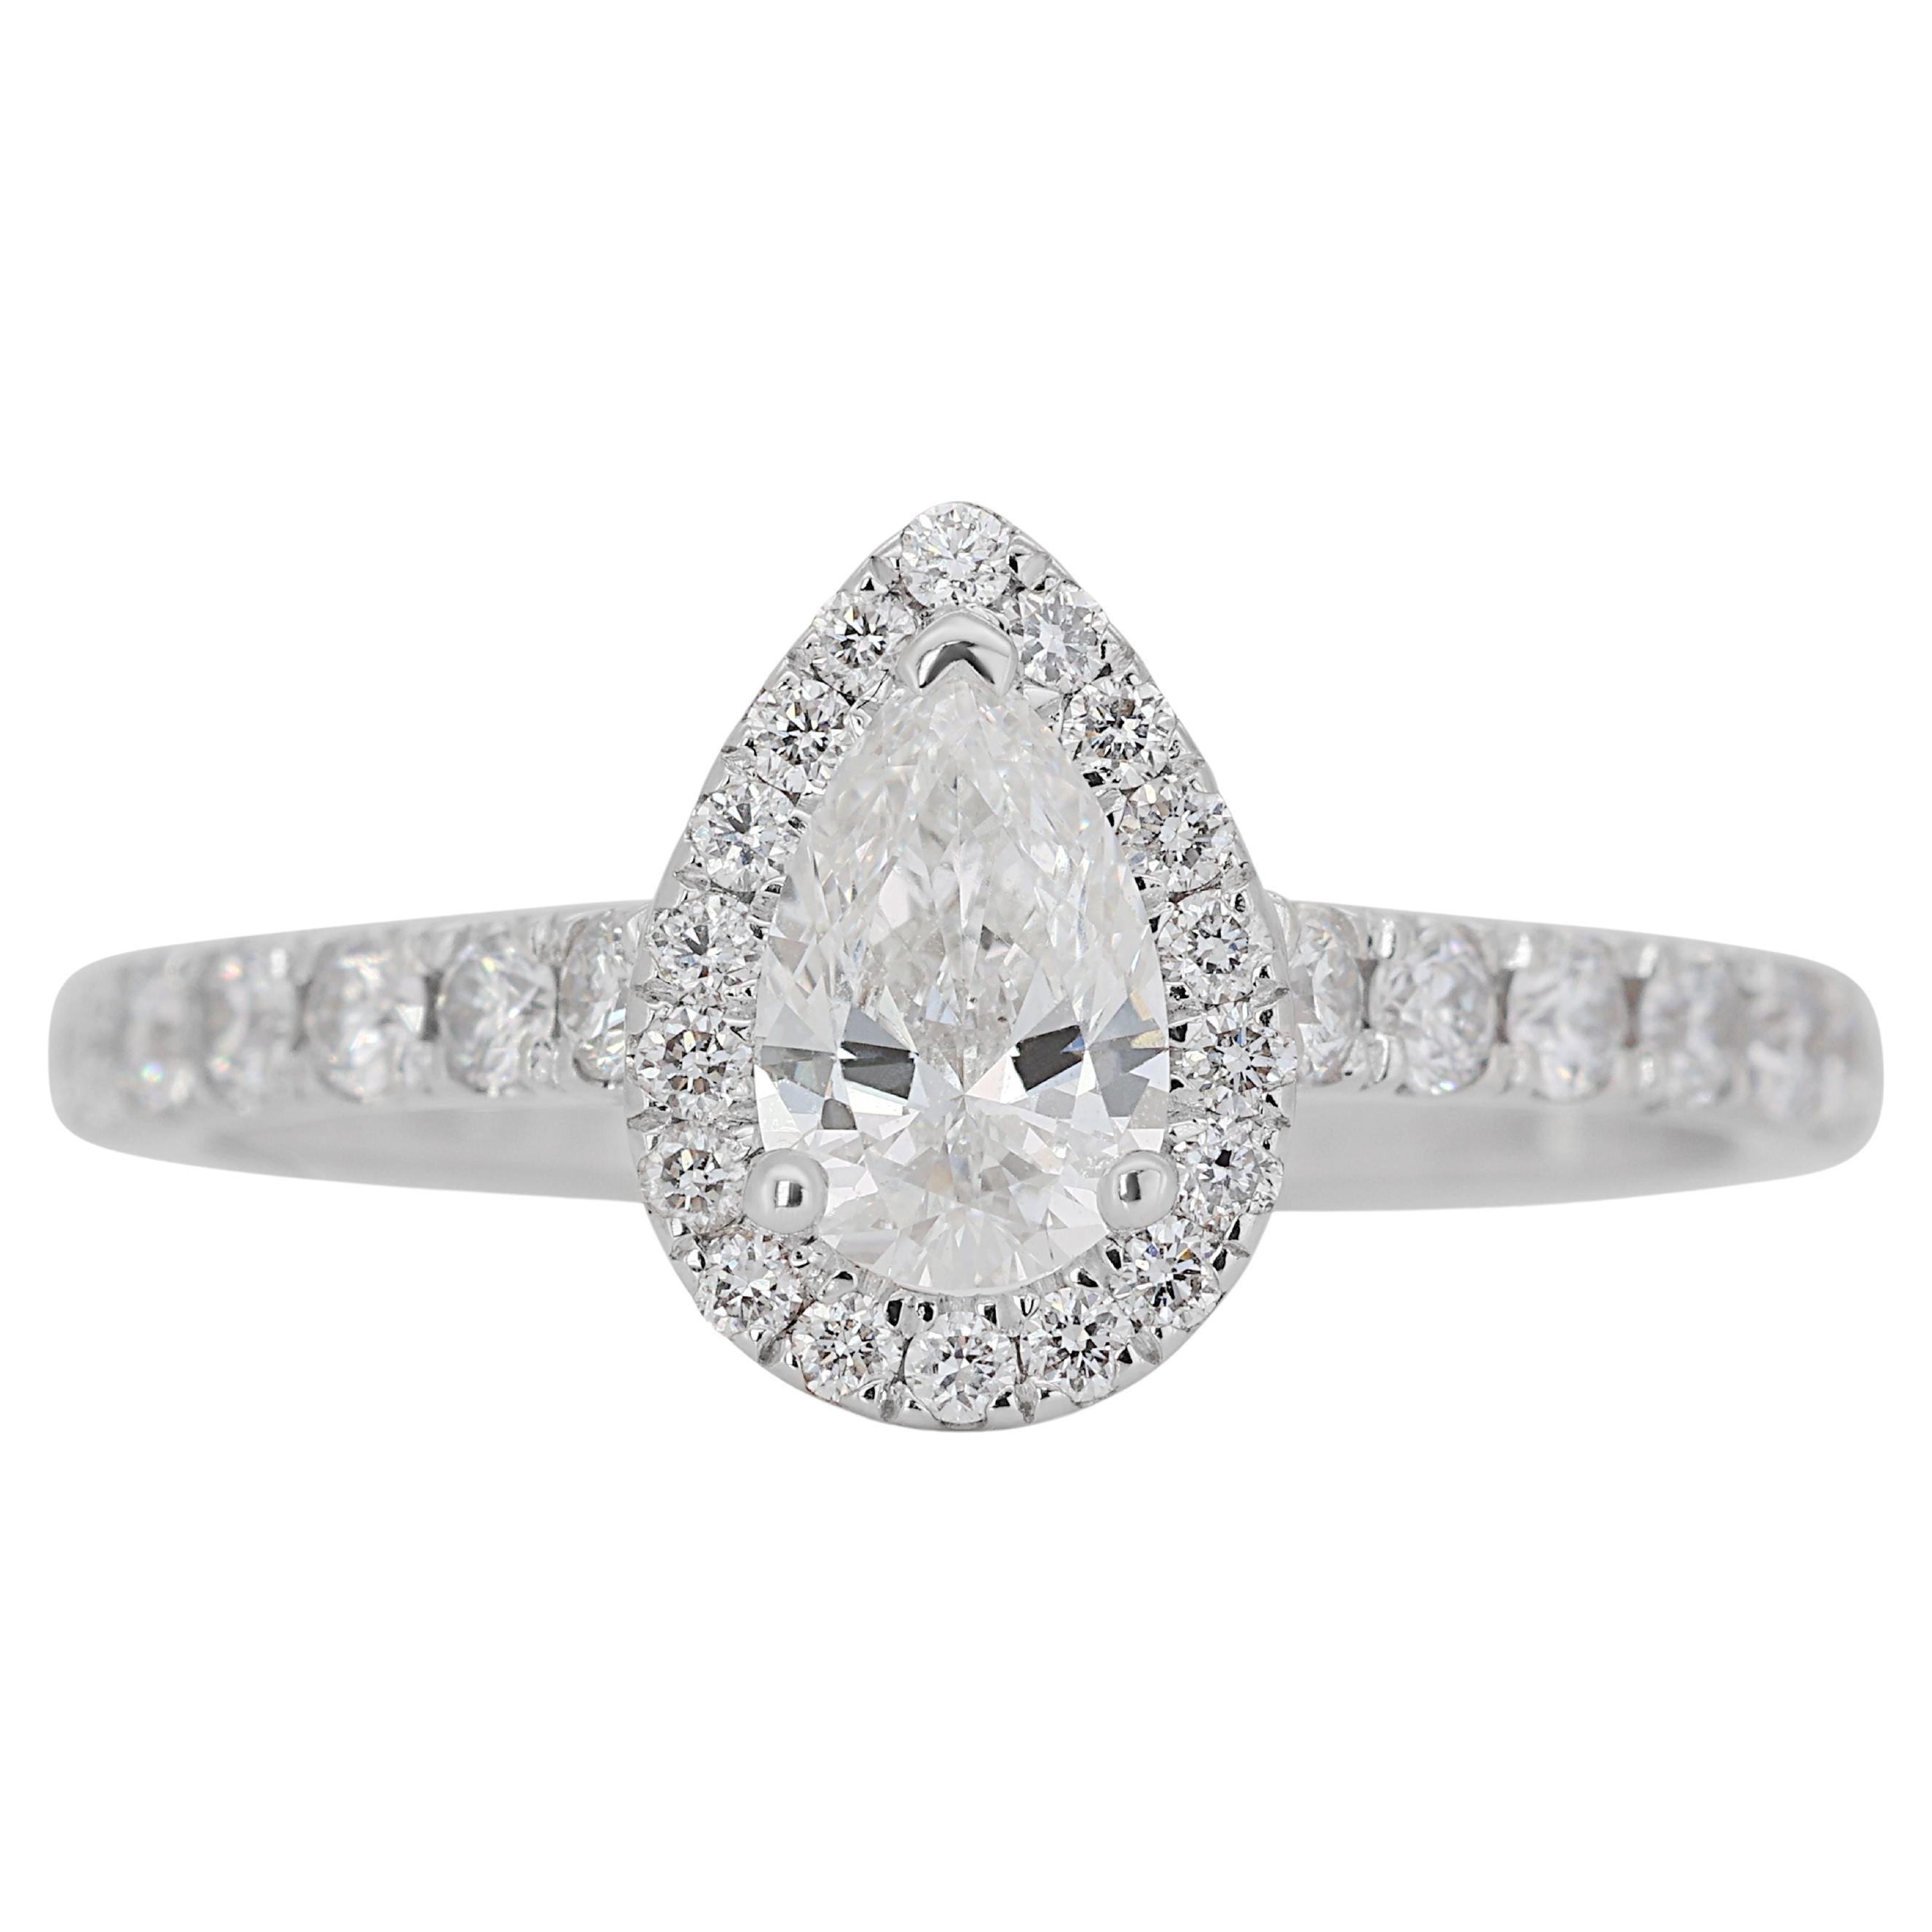 Elegant 18k White Gold with 0.71ct Pear-shaped Diamond Ring